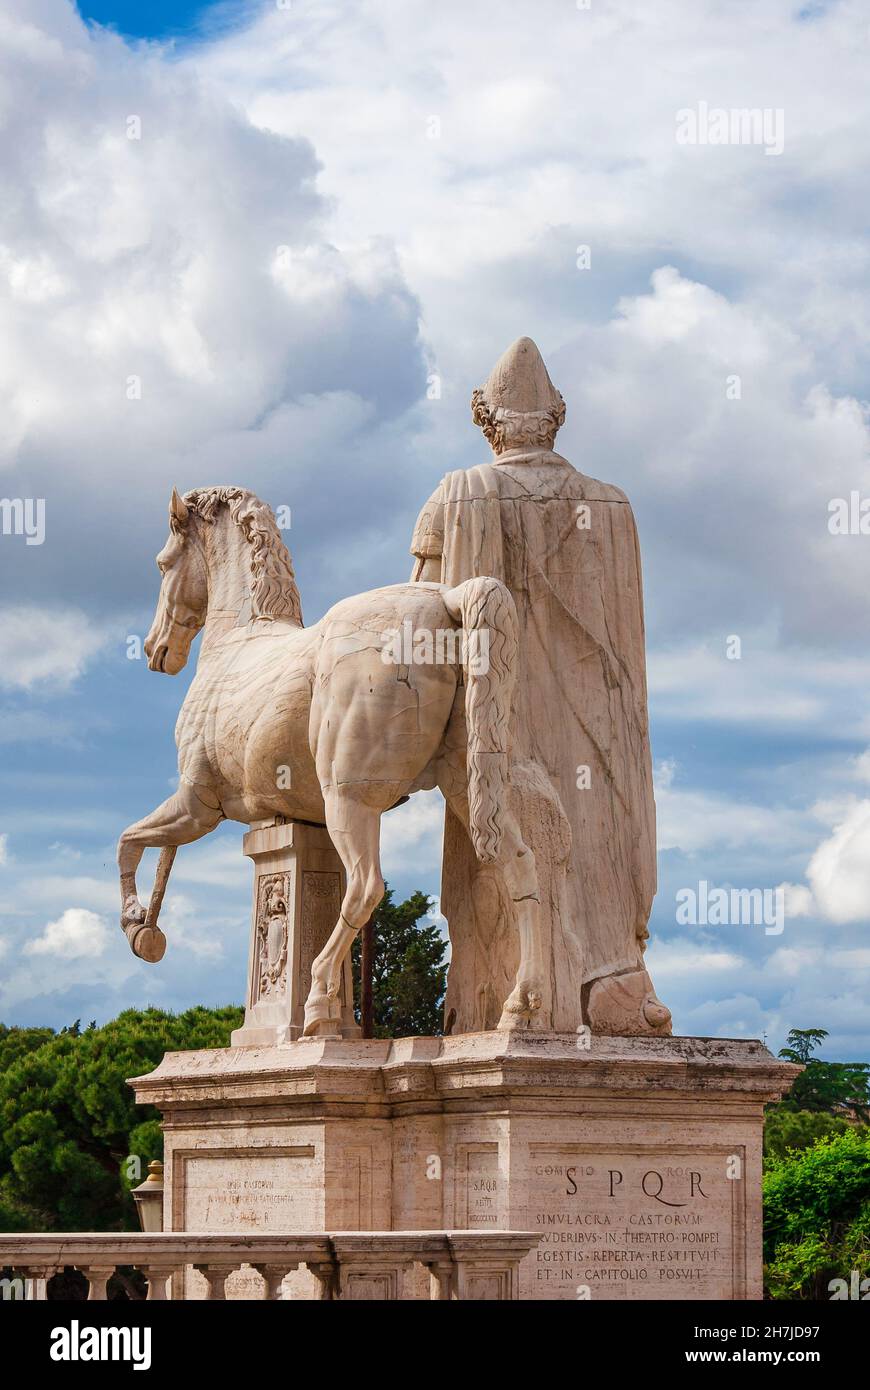 Capitoline Hill ancient roman statues of the Dioscuri in the center of Rome (1st century BC), among clouds Stock Photo